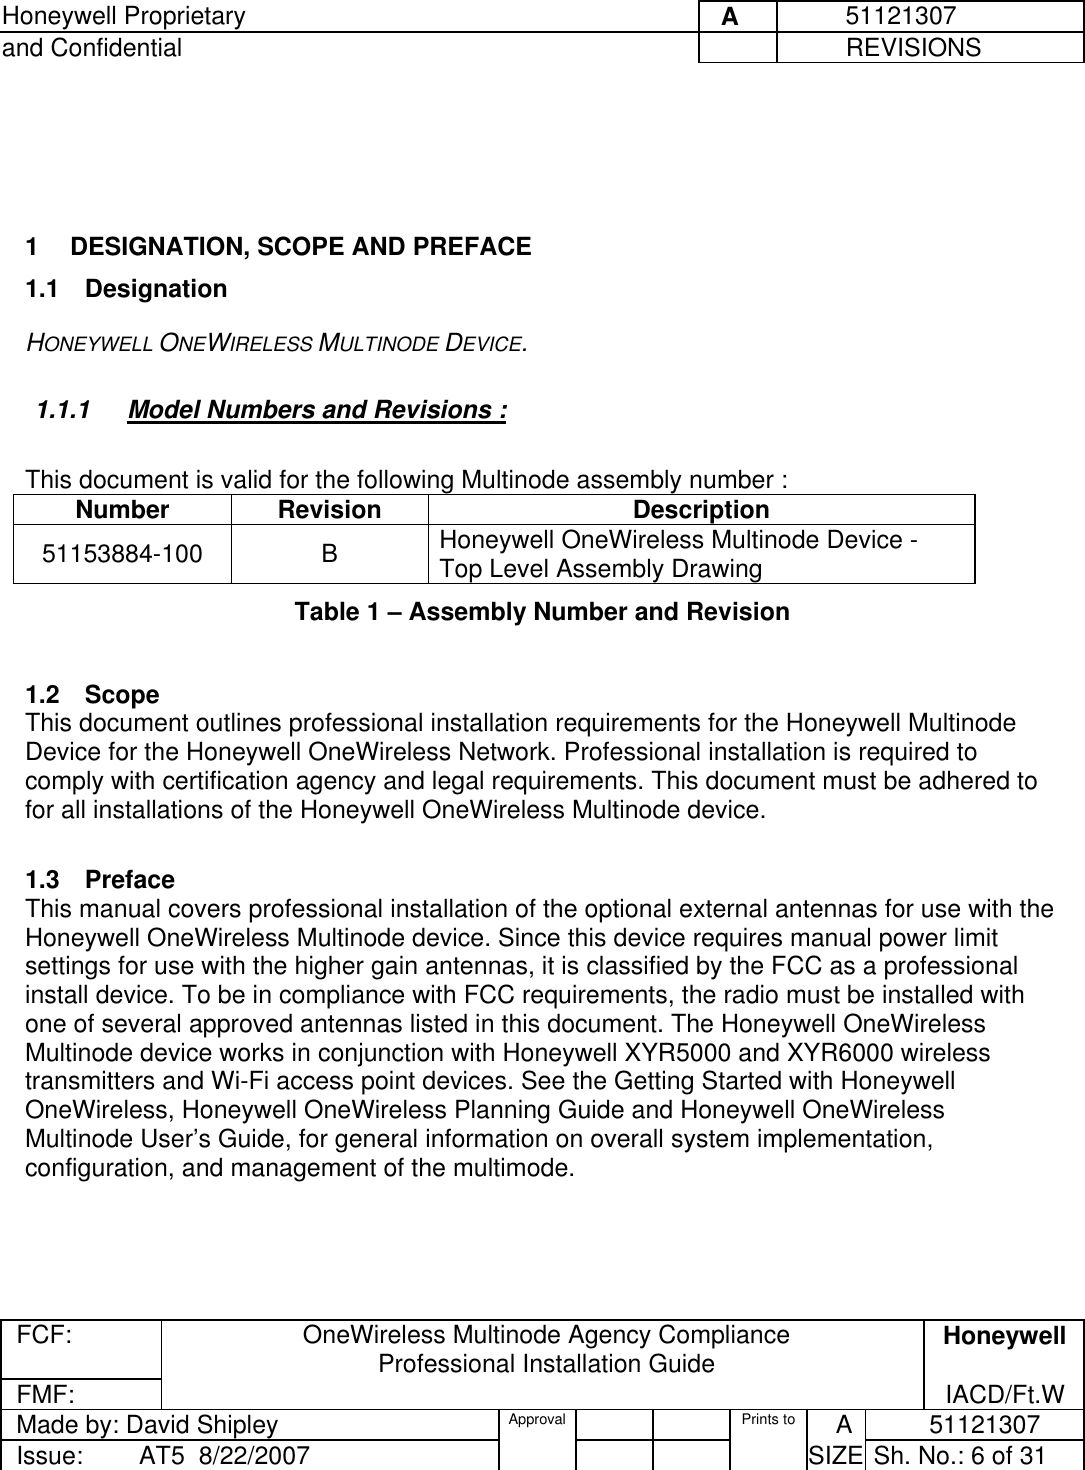 Honeywell Proprietary     A          51121307 and Confidential             REVISIONS  FCF:  OneWireless Multinode Agency Compliance Professional Installation Guide  Honeywell FMF:               IACD/Ft.W Made by: David Shipley  Approval   Prints to     A           51121307 Issue:        AT5  8/22/2007          SIZE  Sh. No.: 6 of 31      1  DESIGNATION, SCOPE AND PREFACE 1.1 Designation HONEYWELL ONEWIRELESS MULTINODE DEVICE.  1.1.1  Model Numbers and Revisions :   This document is valid for the following Multinode assembly number :  Number Revision  Description 51153884-100 B Honeywell OneWireless Multinode Device - Top Level Assembly Drawing Table 1 – Assembly Number and Revision   1.2 Scope This document outlines professional installation requirements for the Honeywell Multinode Device for the Honeywell OneWireless Network. Professional installation is required to comply with certification agency and legal requirements. This document must be adhered to for all installations of the Honeywell OneWireless Multinode device.   1.3 Preface This manual covers professional installation of the optional external antennas for use with the Honeywell OneWireless Multinode device. Since this device requires manual power limit settings for use with the higher gain antennas, it is classified by the FCC as a professional install device. To be in compliance with FCC requirements, the radio must be installed with one of several approved antennas listed in this document. The Honeywell OneWireless Multinode device works in conjunction with Honeywell XYR5000 and XYR6000 wireless transmitters and Wi-Fi access point devices. See the Getting Started with Honeywell OneWireless, Honeywell OneWireless Planning Guide and Honeywell OneWireless Multinode User’s Guide, for general information on overall system implementation, configuration, and management of the multimode.  